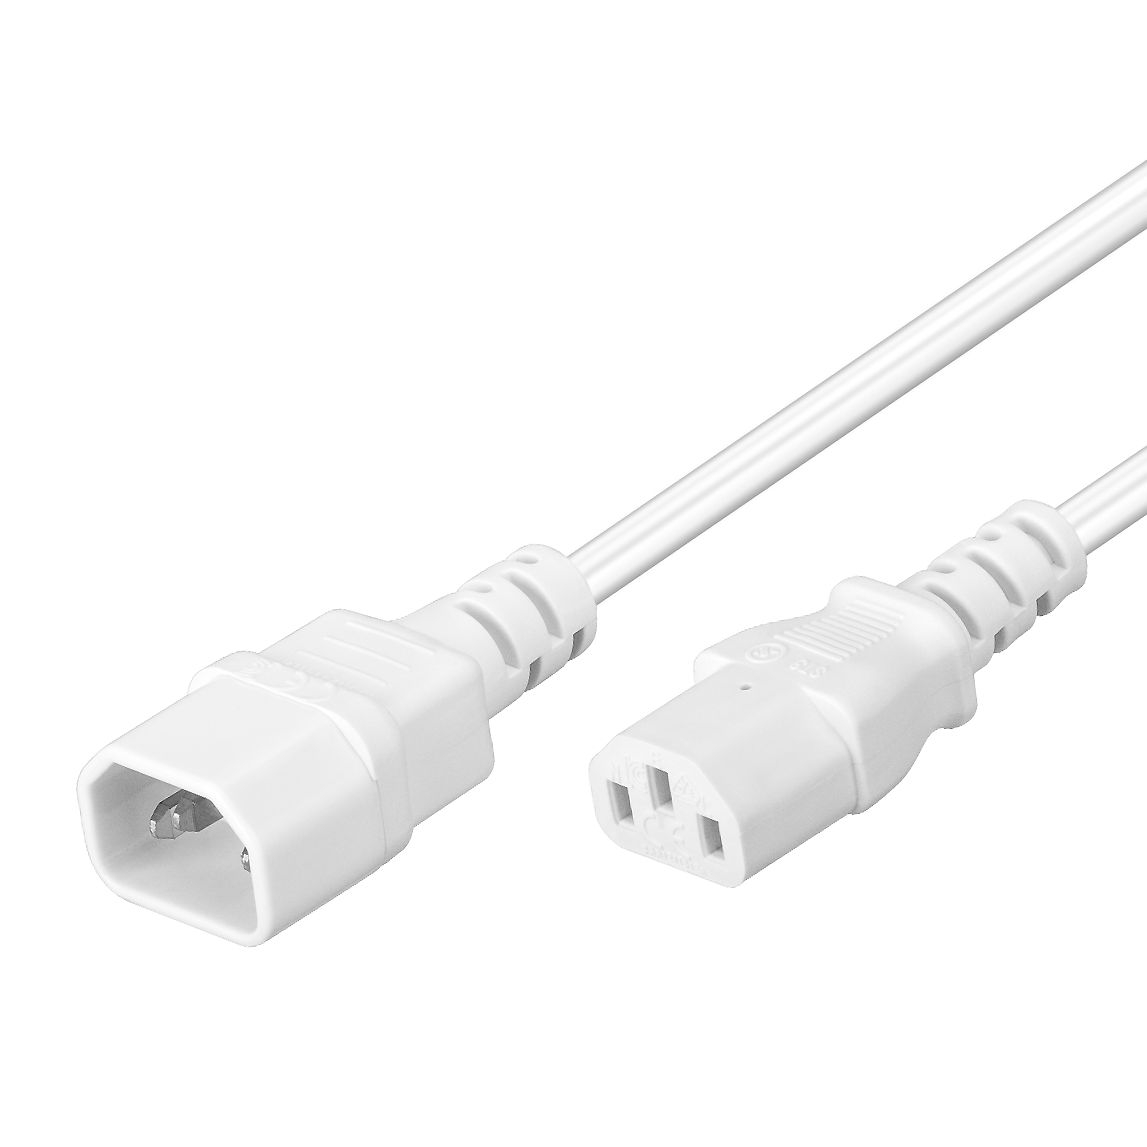 Power cord extension cable C13 to C14 white 50cm